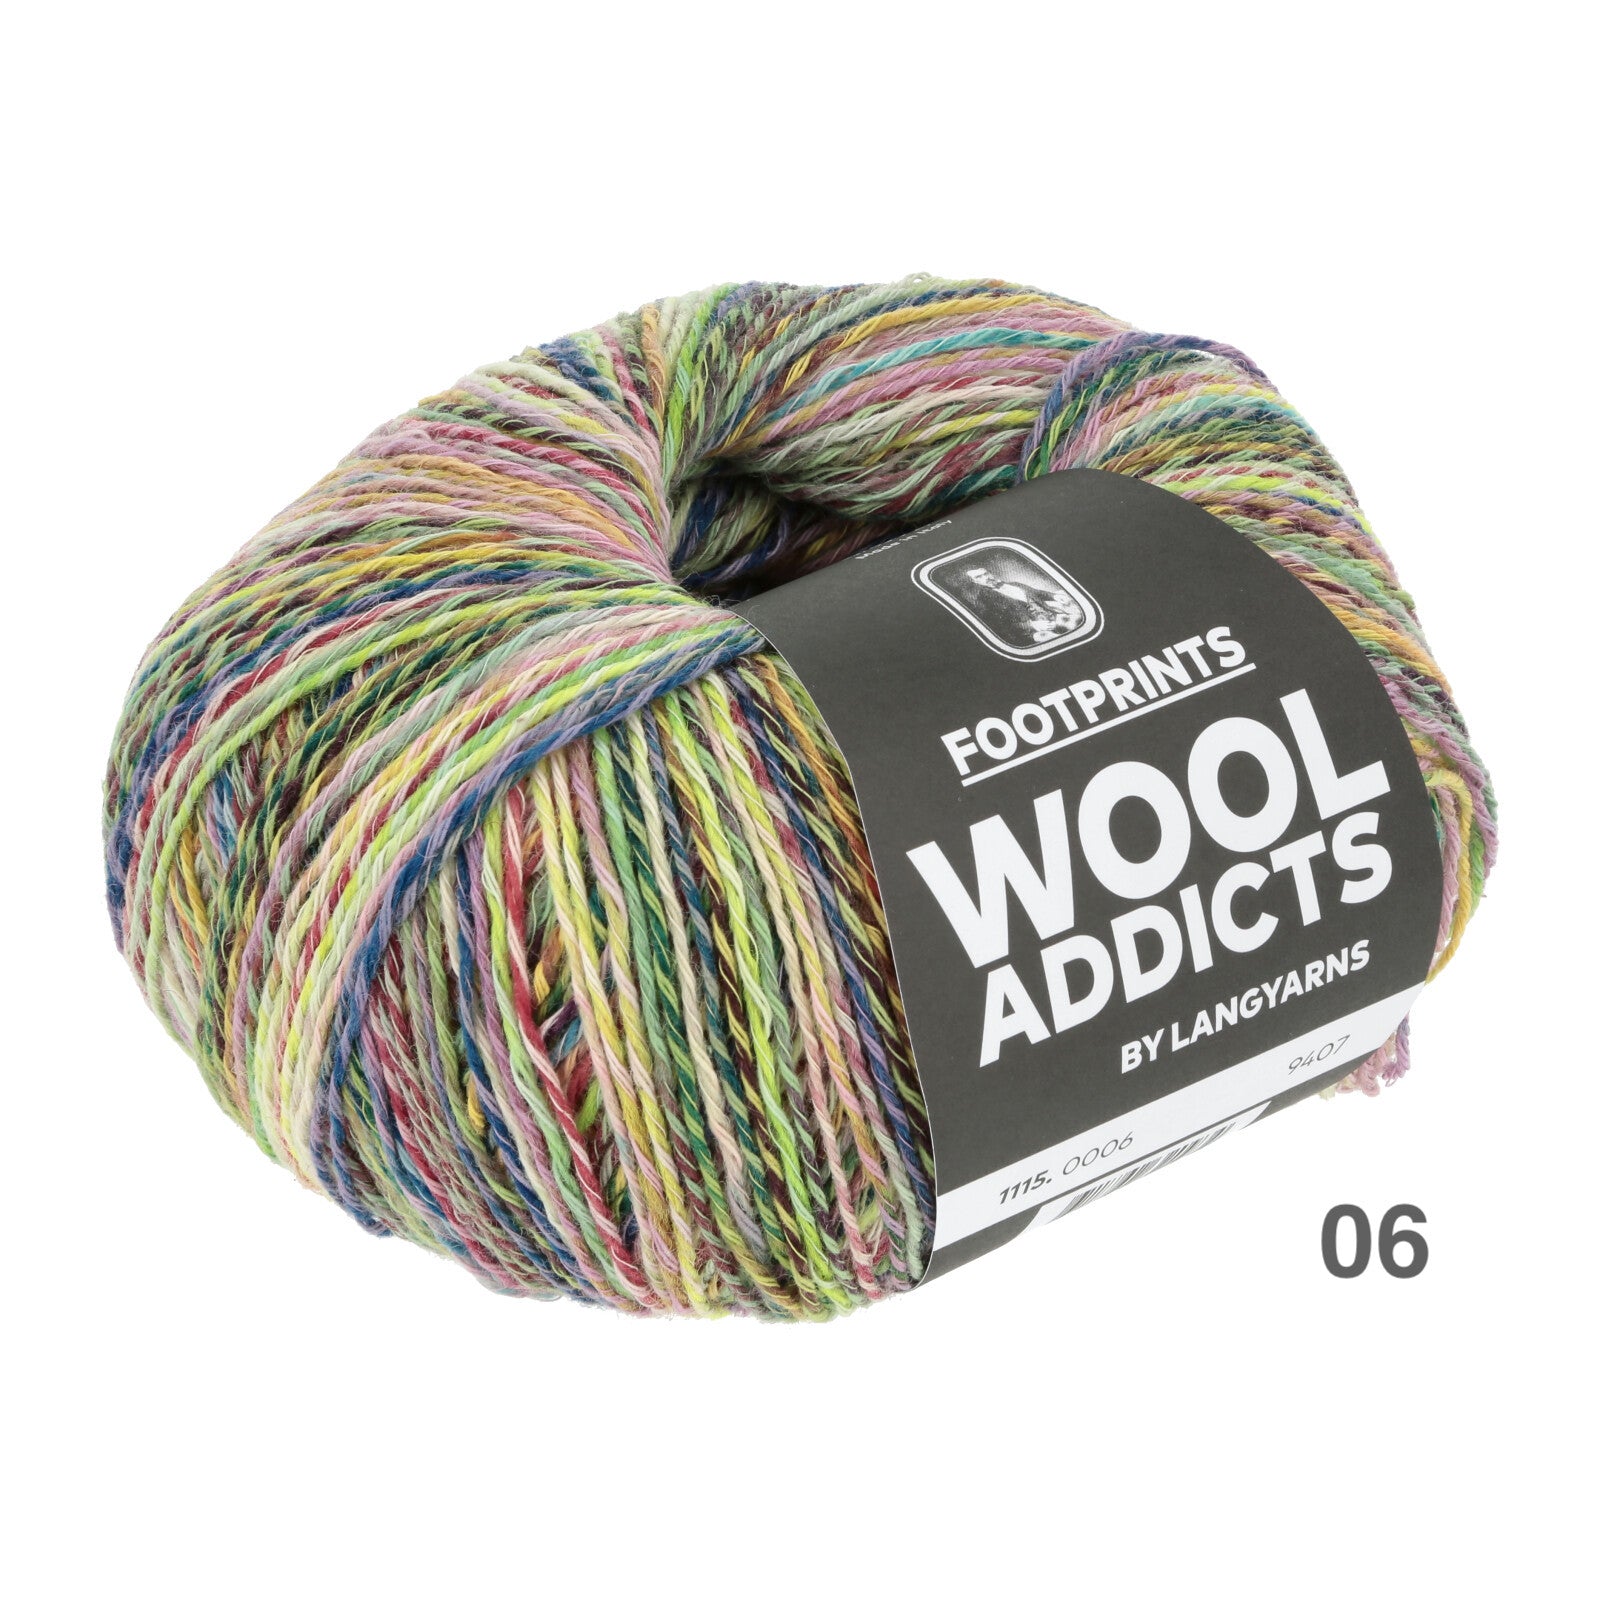 Footprints by Wool Addicts color 06